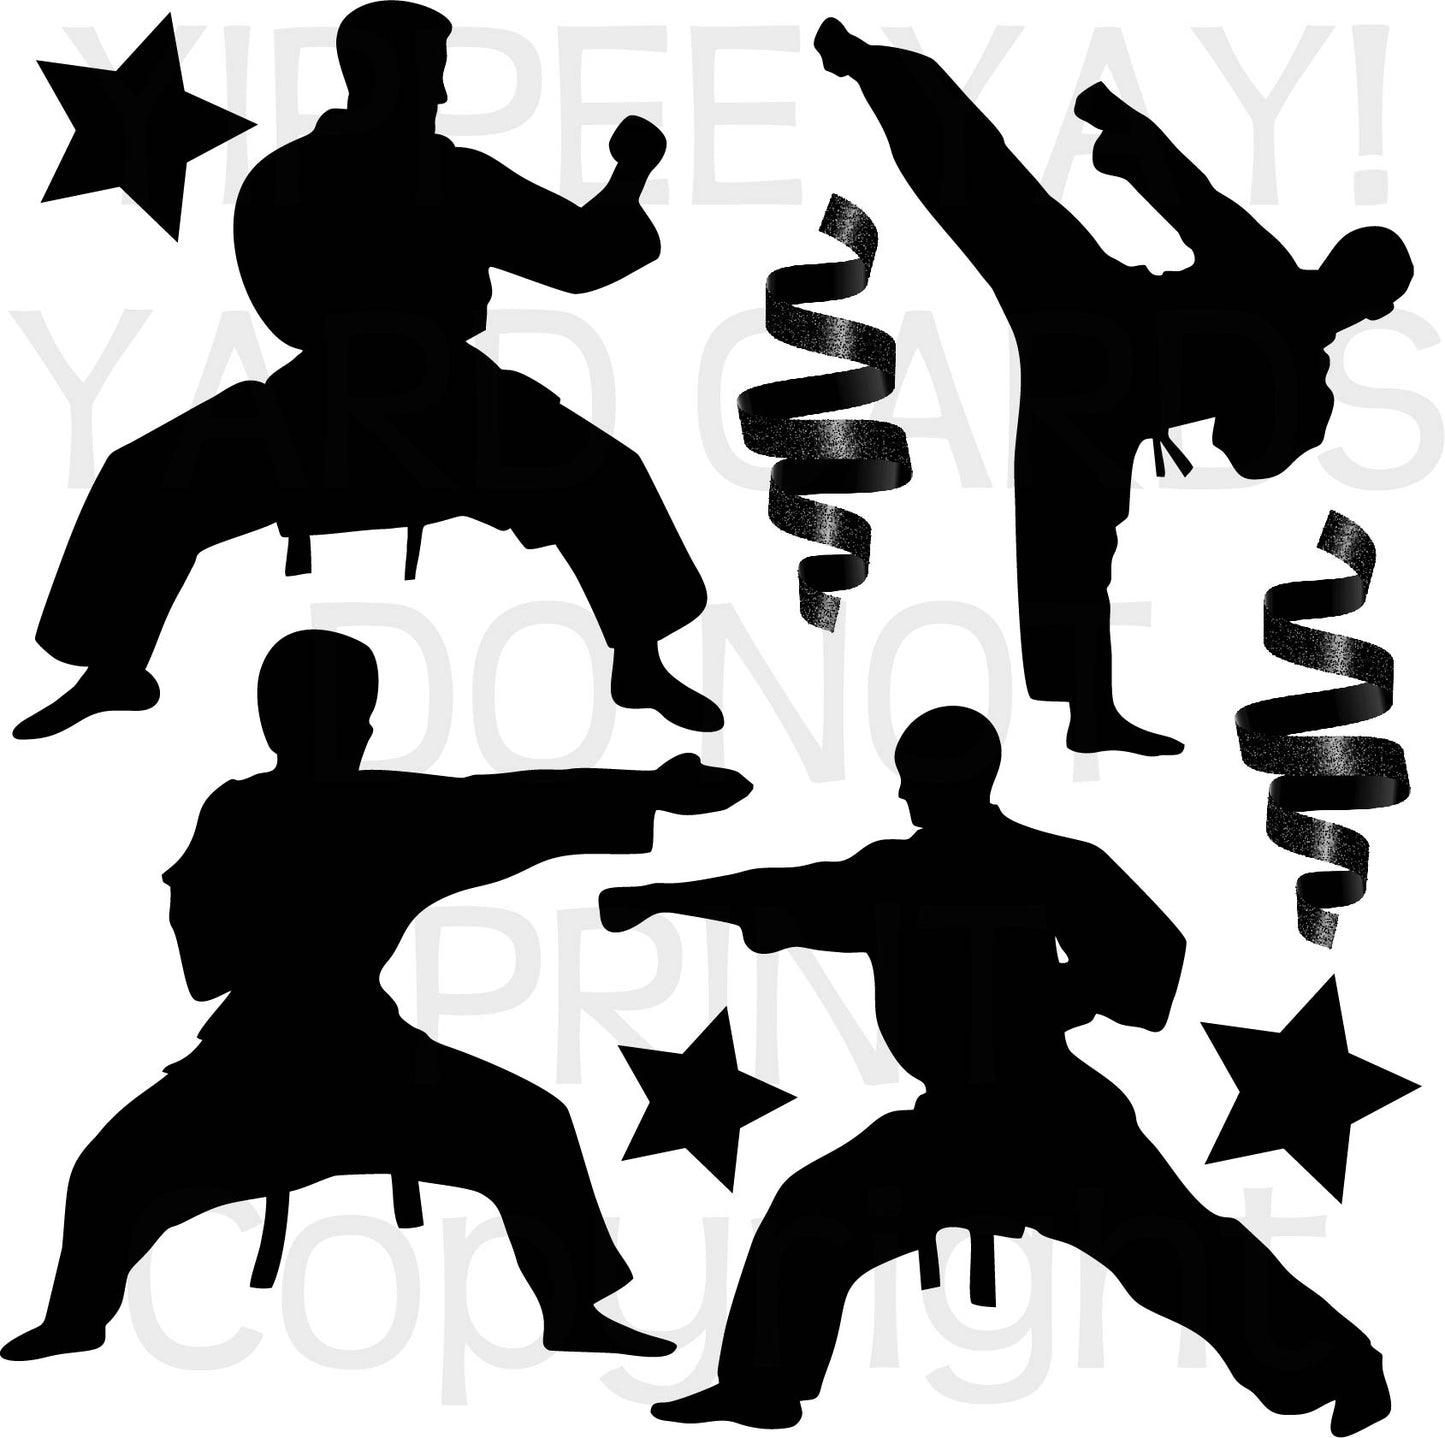 Karate Silhouettes - Half Sheet Misc. (Must Purchase 2 Half sheets - You Can Mix & Match)